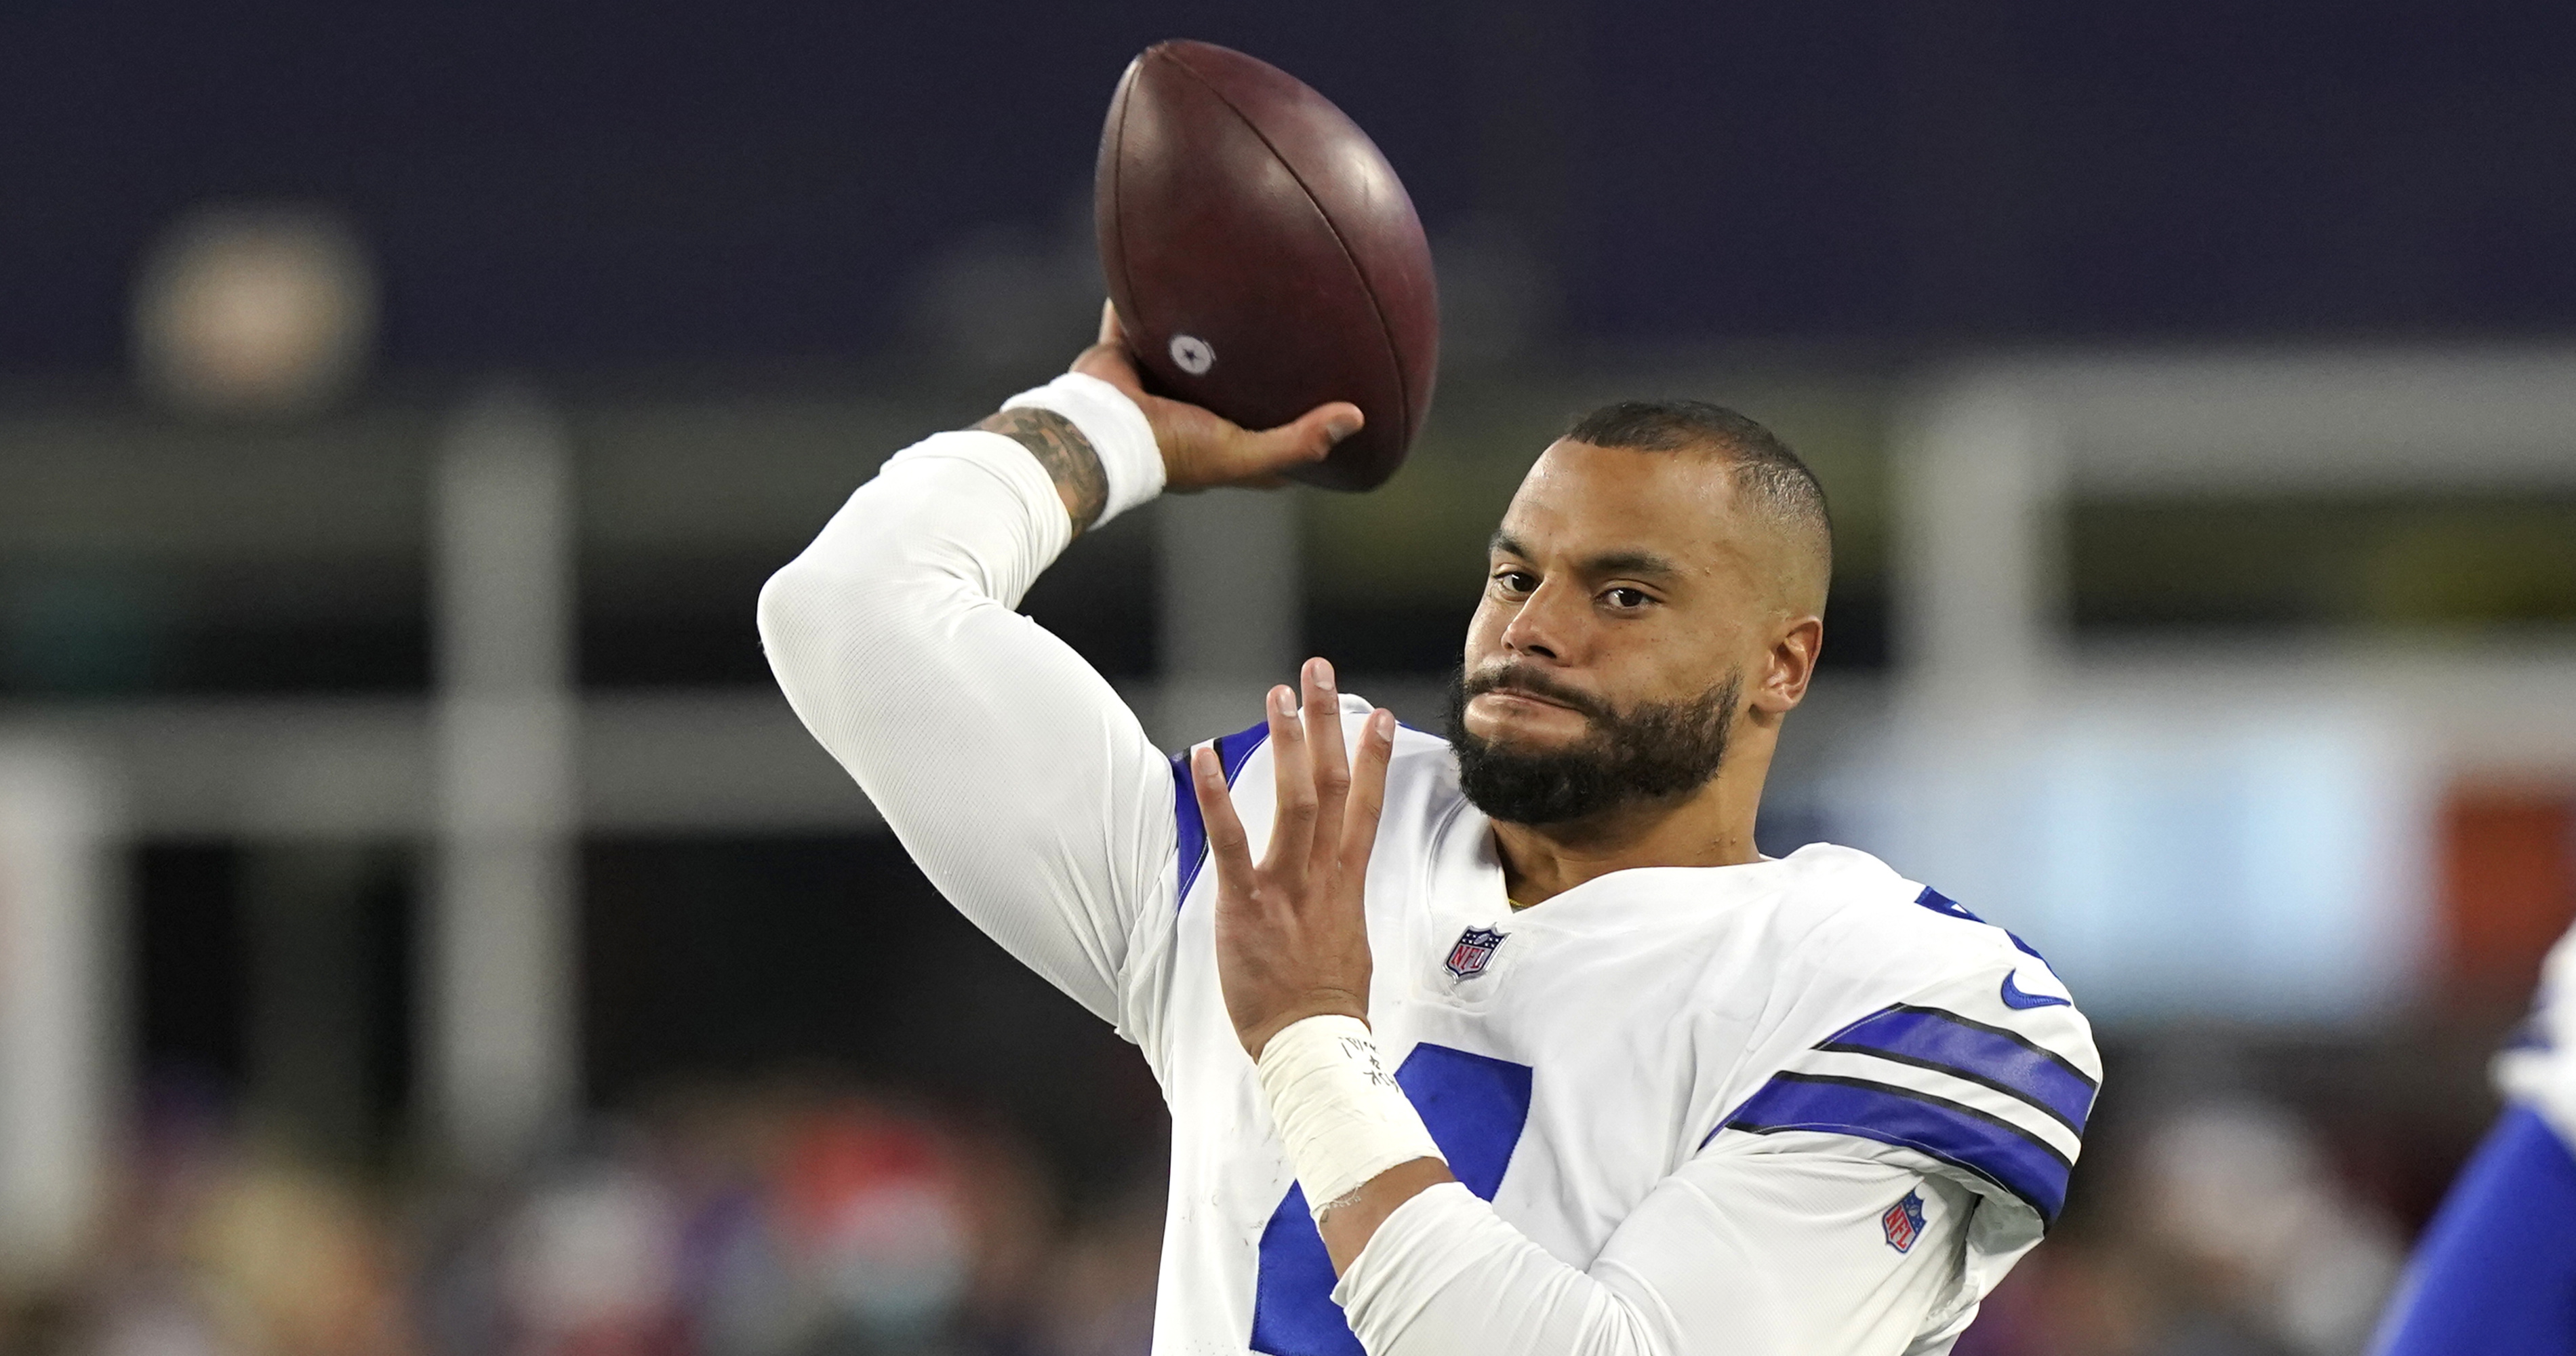 Dak Prescott on Cowboys' 51 Start 'We Know We're for Real, and We